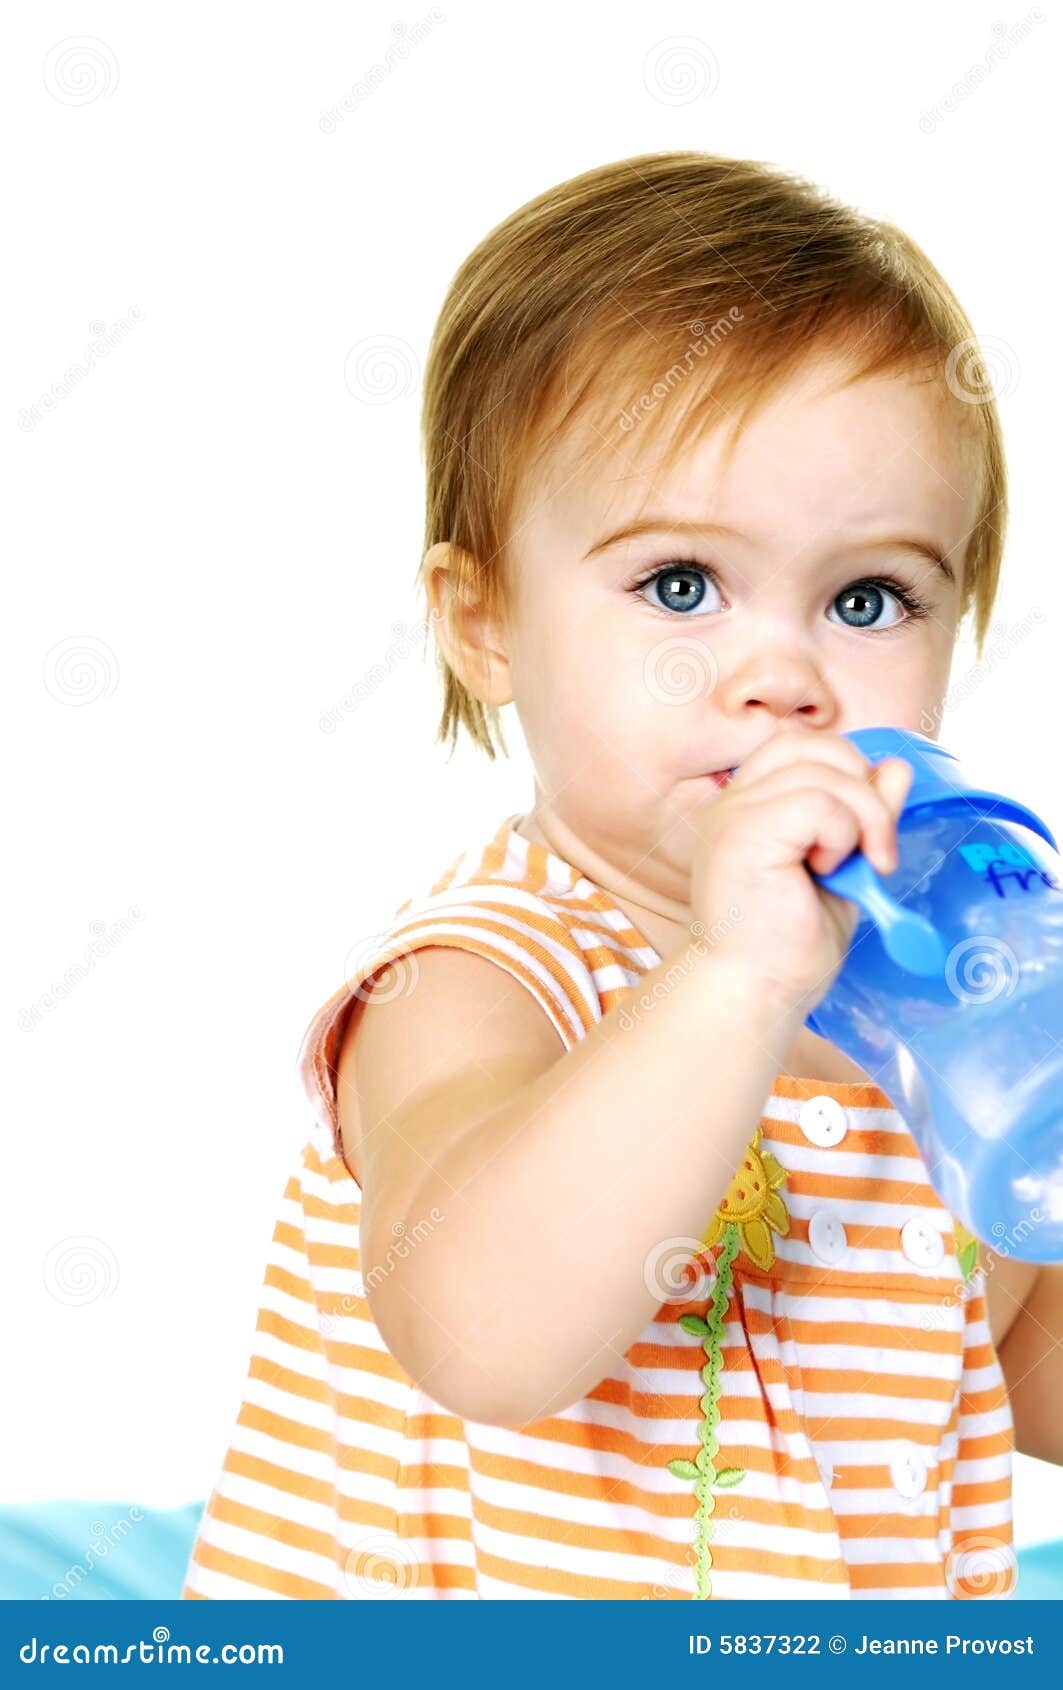 1,600+ Toddler Drinking Cup Stock Photos, Pictures & Royalty-Free